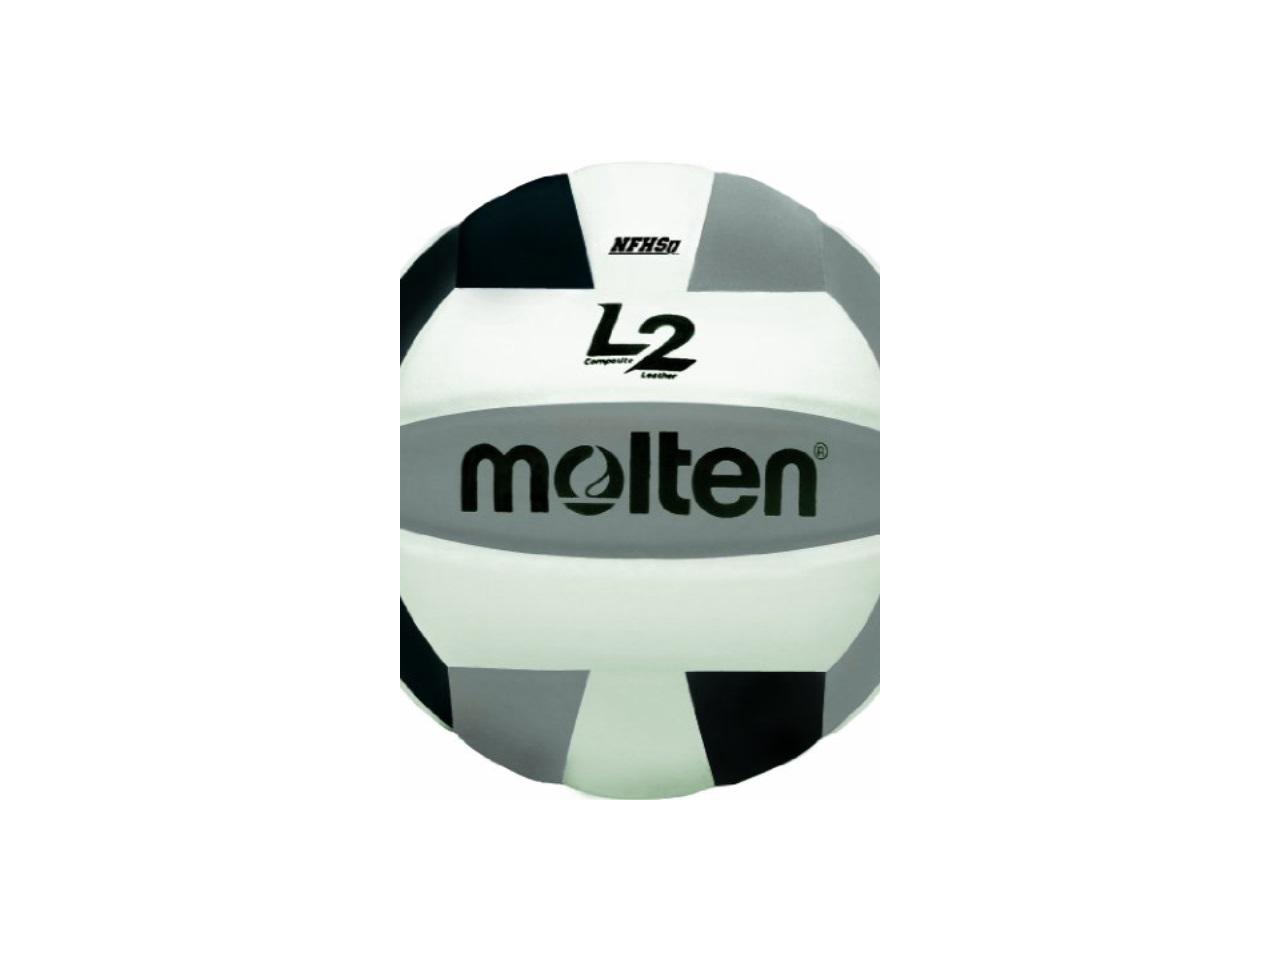 Molten Premium Competition L2 Volleyball NFHS Approved 